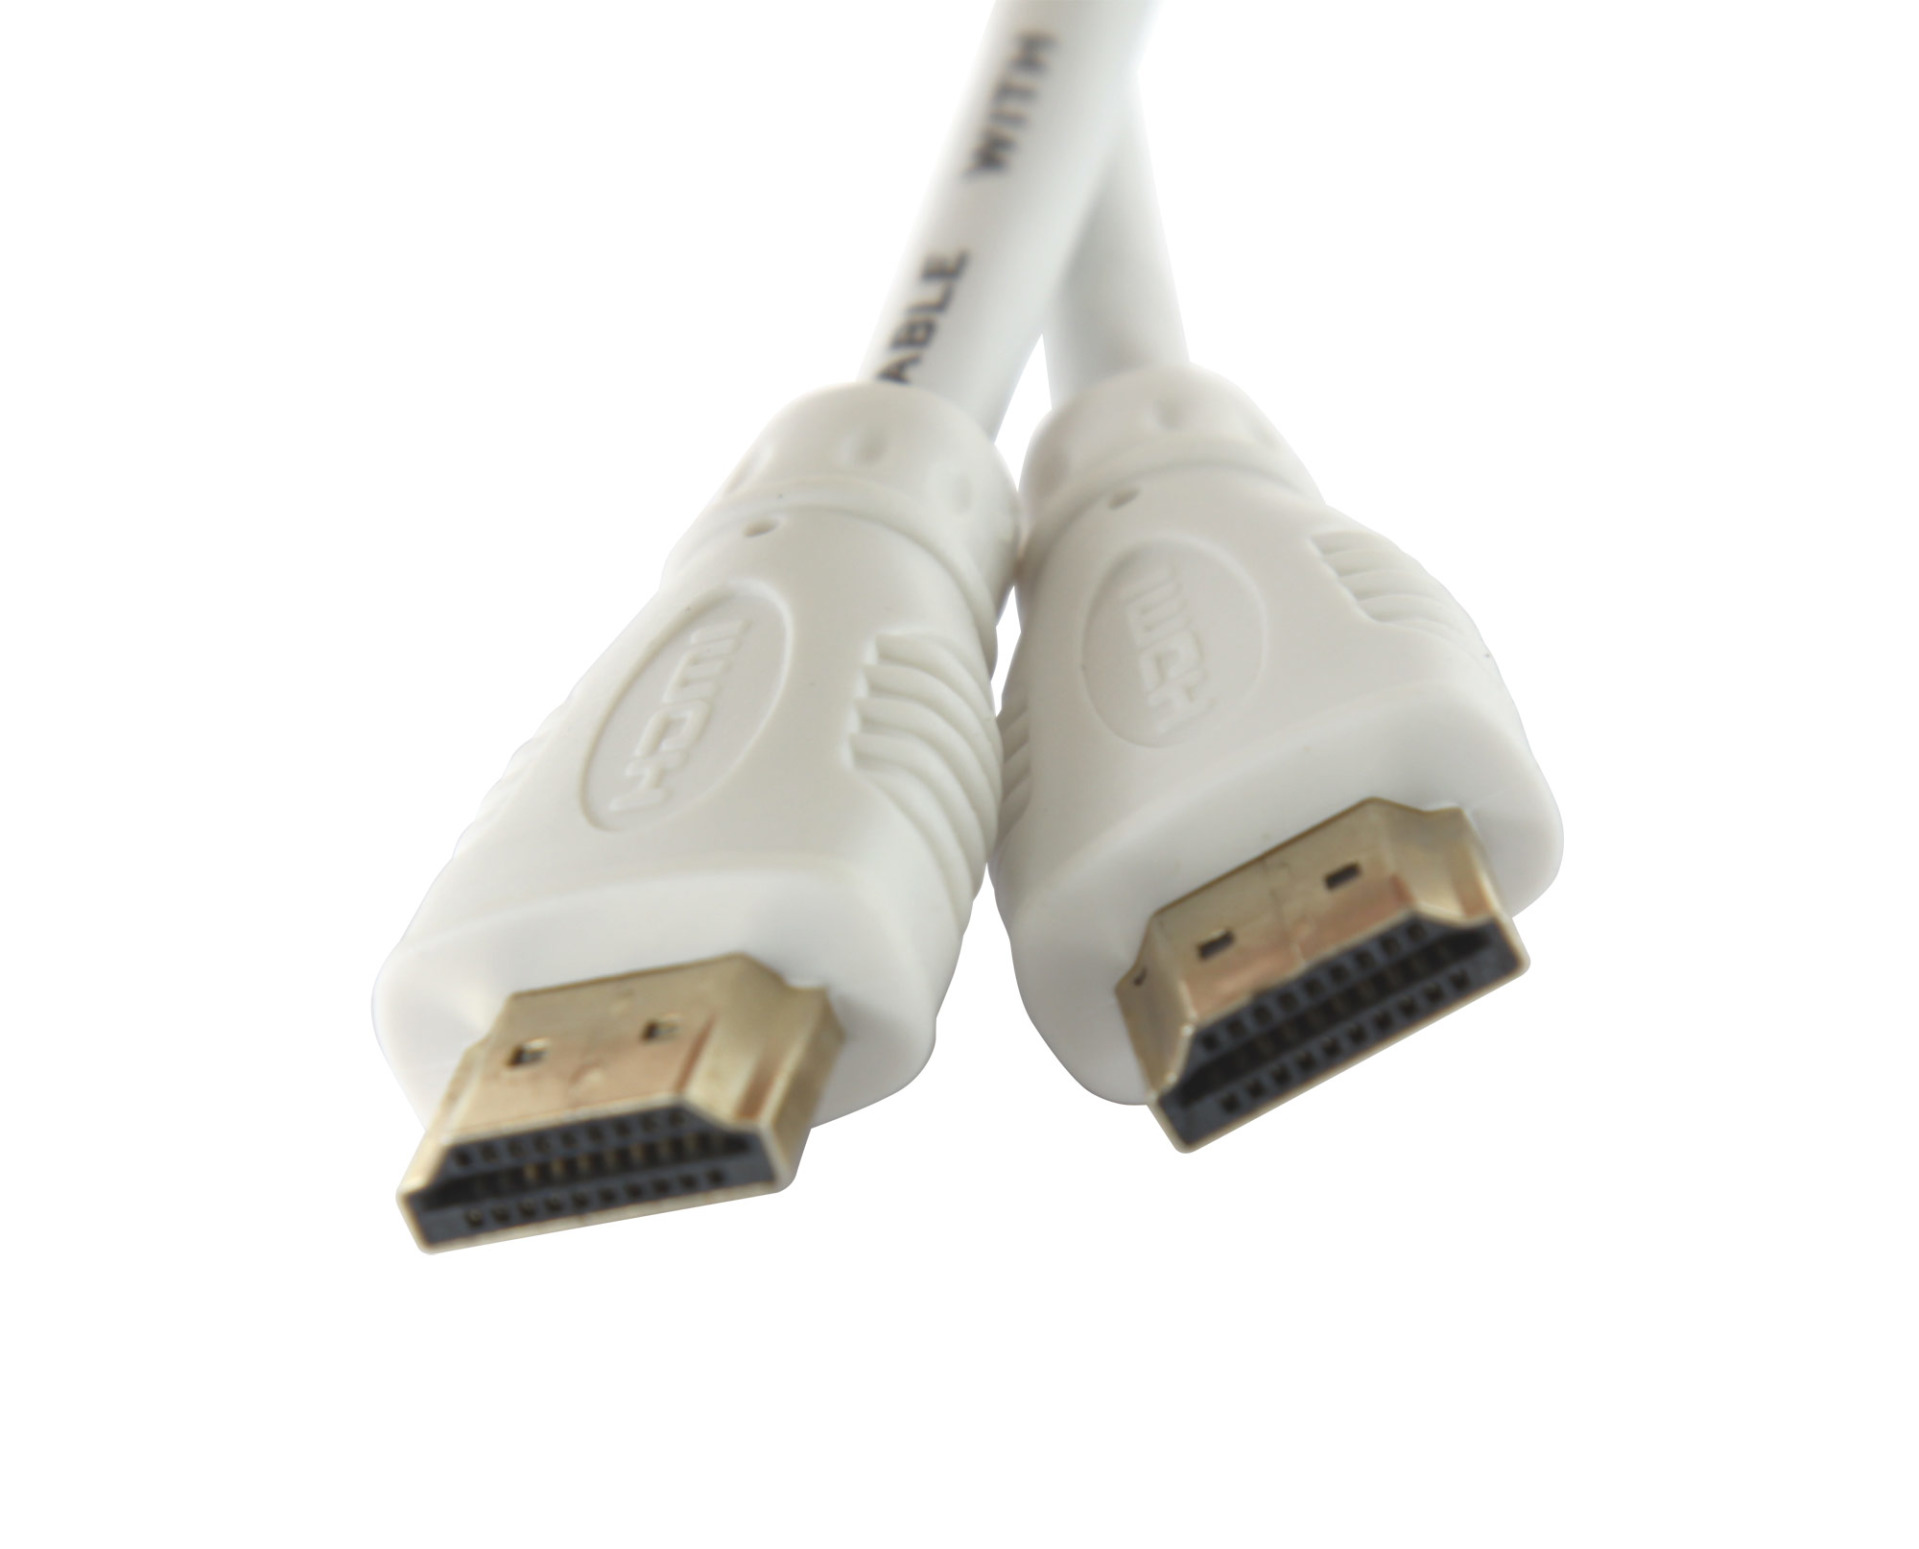 High Speed HDMI Cable with Ethernet, white, 0.5m